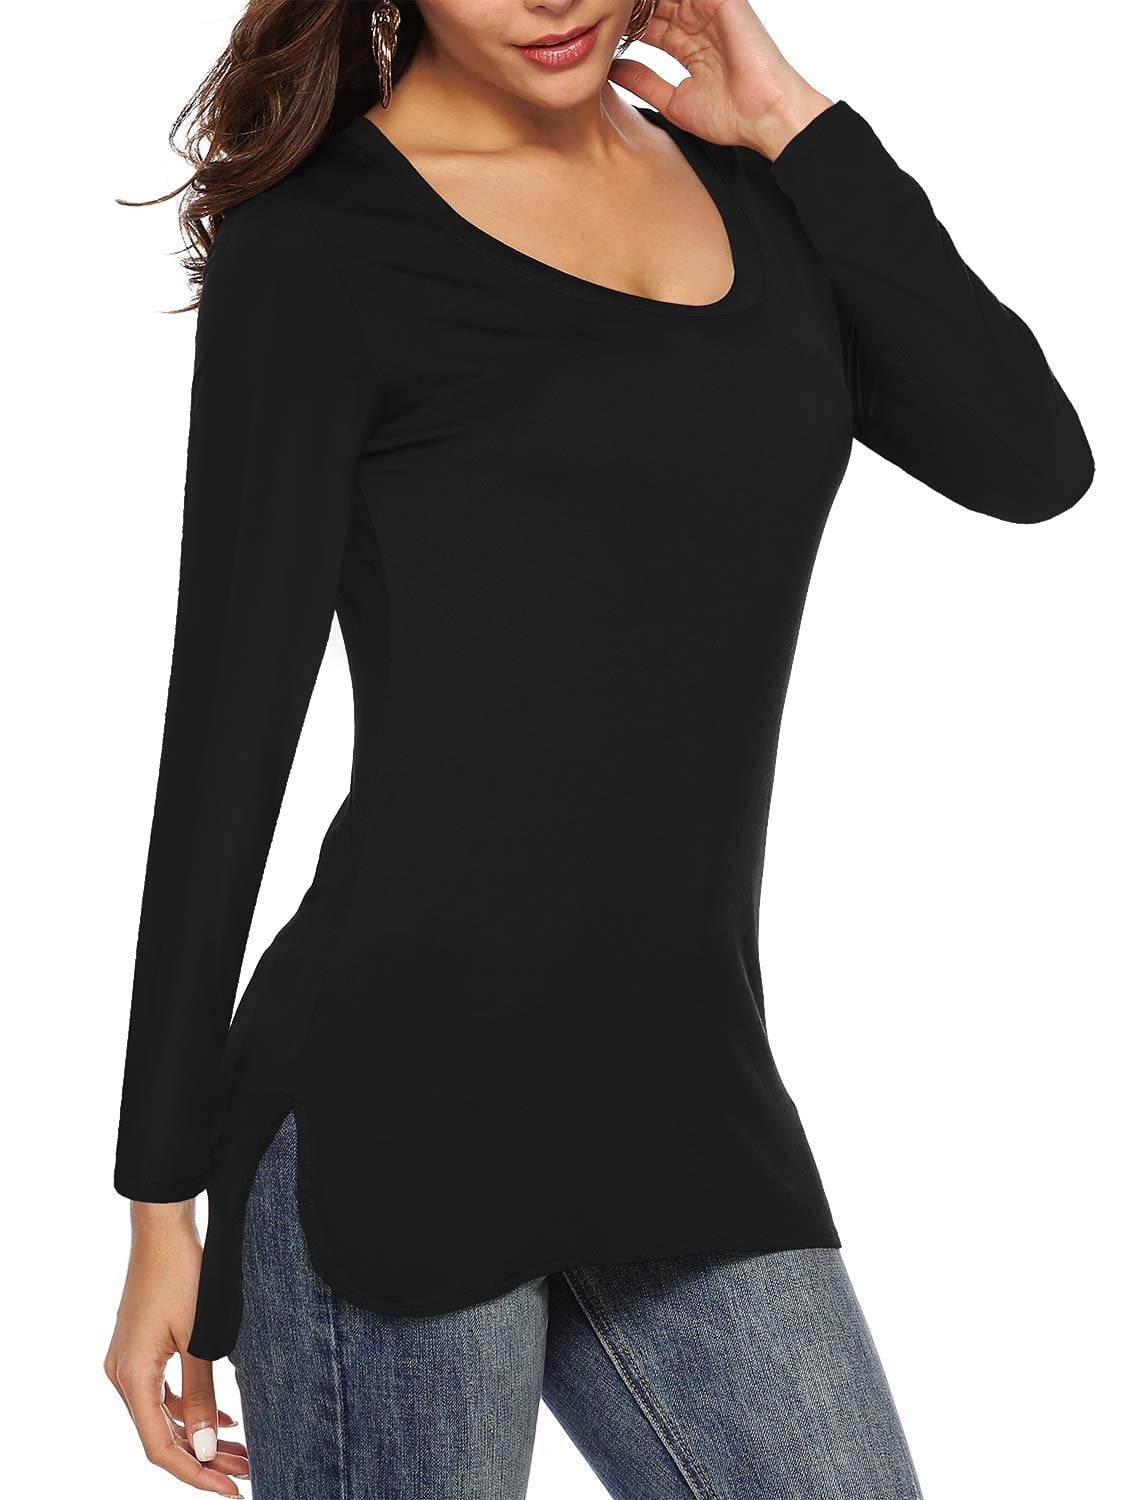 Amoretu Womens Scoop Neck Long Sleeve Shirts Fitted Tops(Black S ...